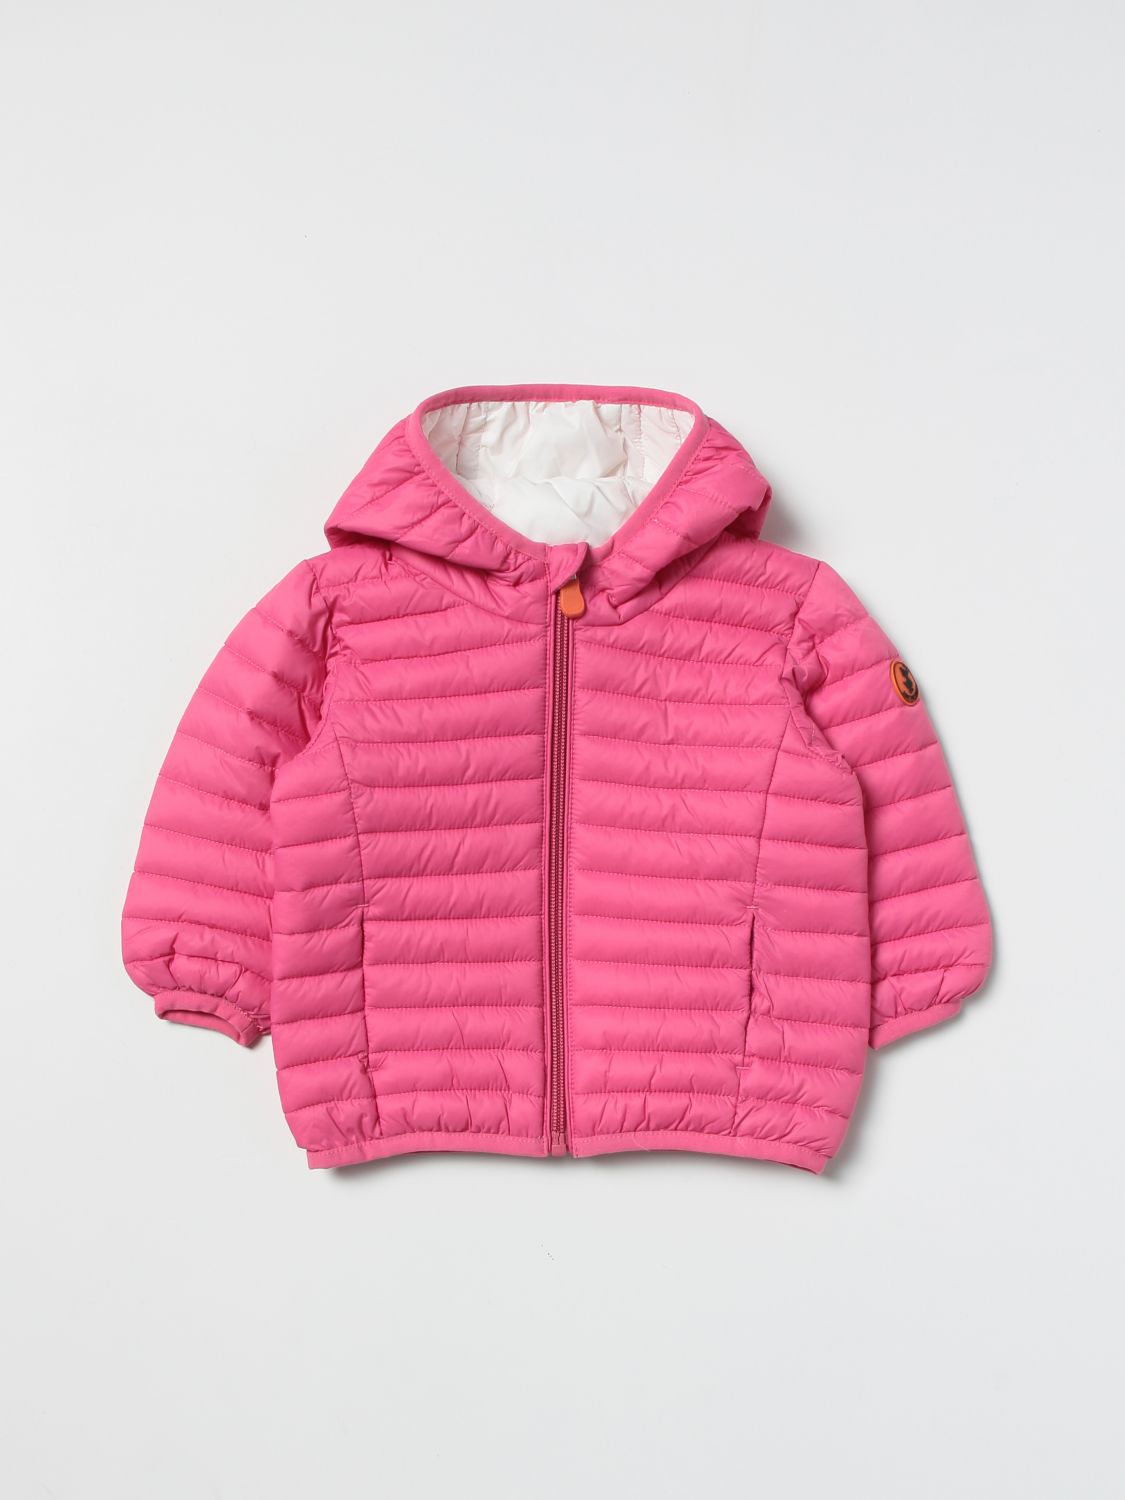 Jacke Save The Duck: Save The Duck Baby Jacke pink 1